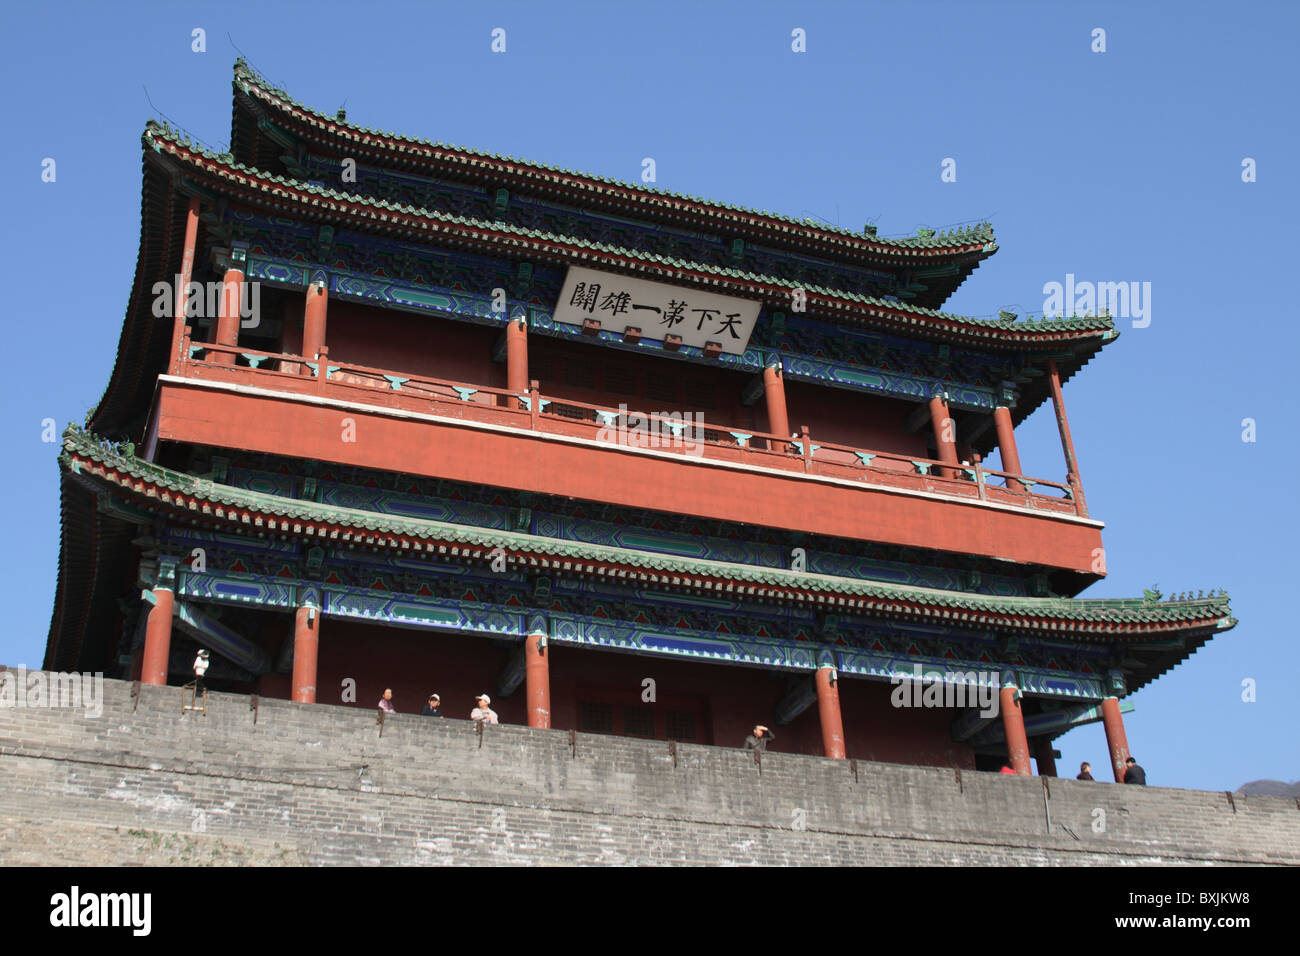 Gate Tower of Juyongguan, Great Wall of China. 'The Number One Grand Pass' Stock Photo